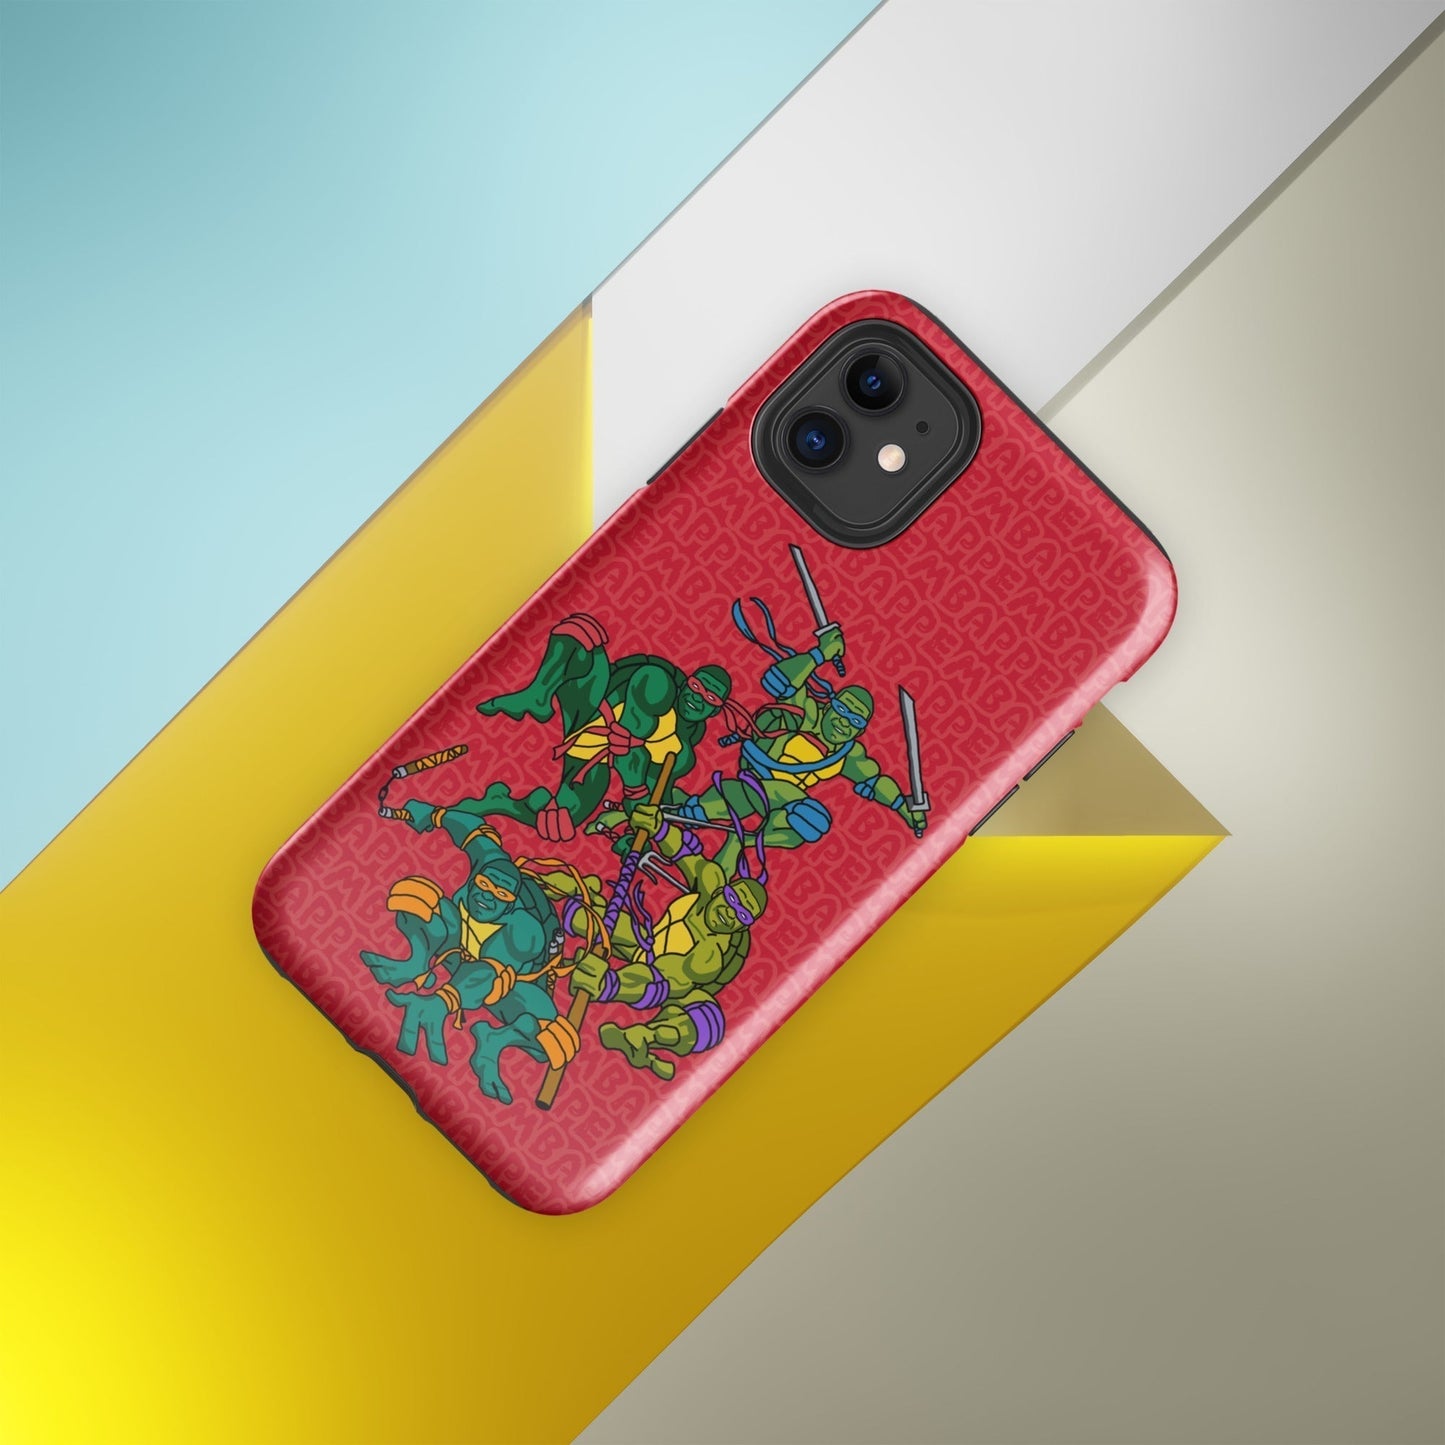 Kylian Mbappe Ninja Turtles funny football/ soccer meme Tough Case for iPhone® red Next Cult Brand Football, Kylian Mbappe, Ninja Turtles, PSG